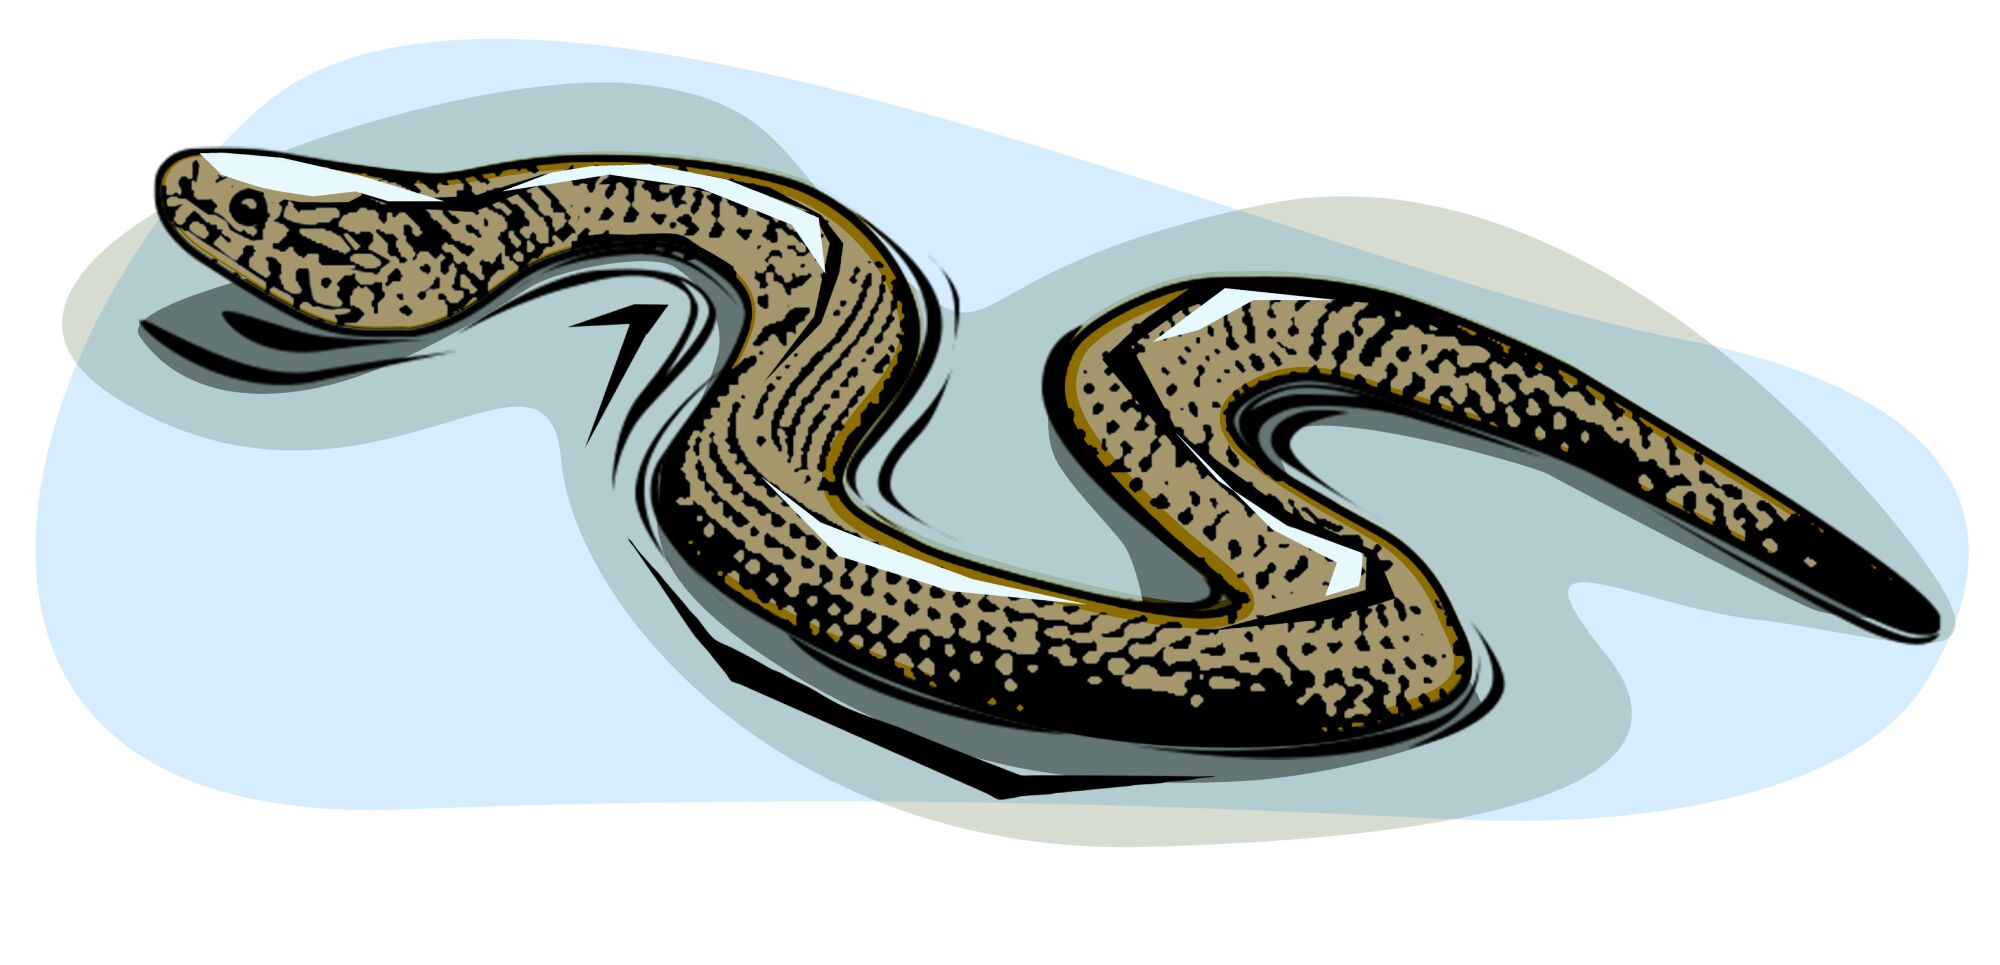 Illustration of a water snake